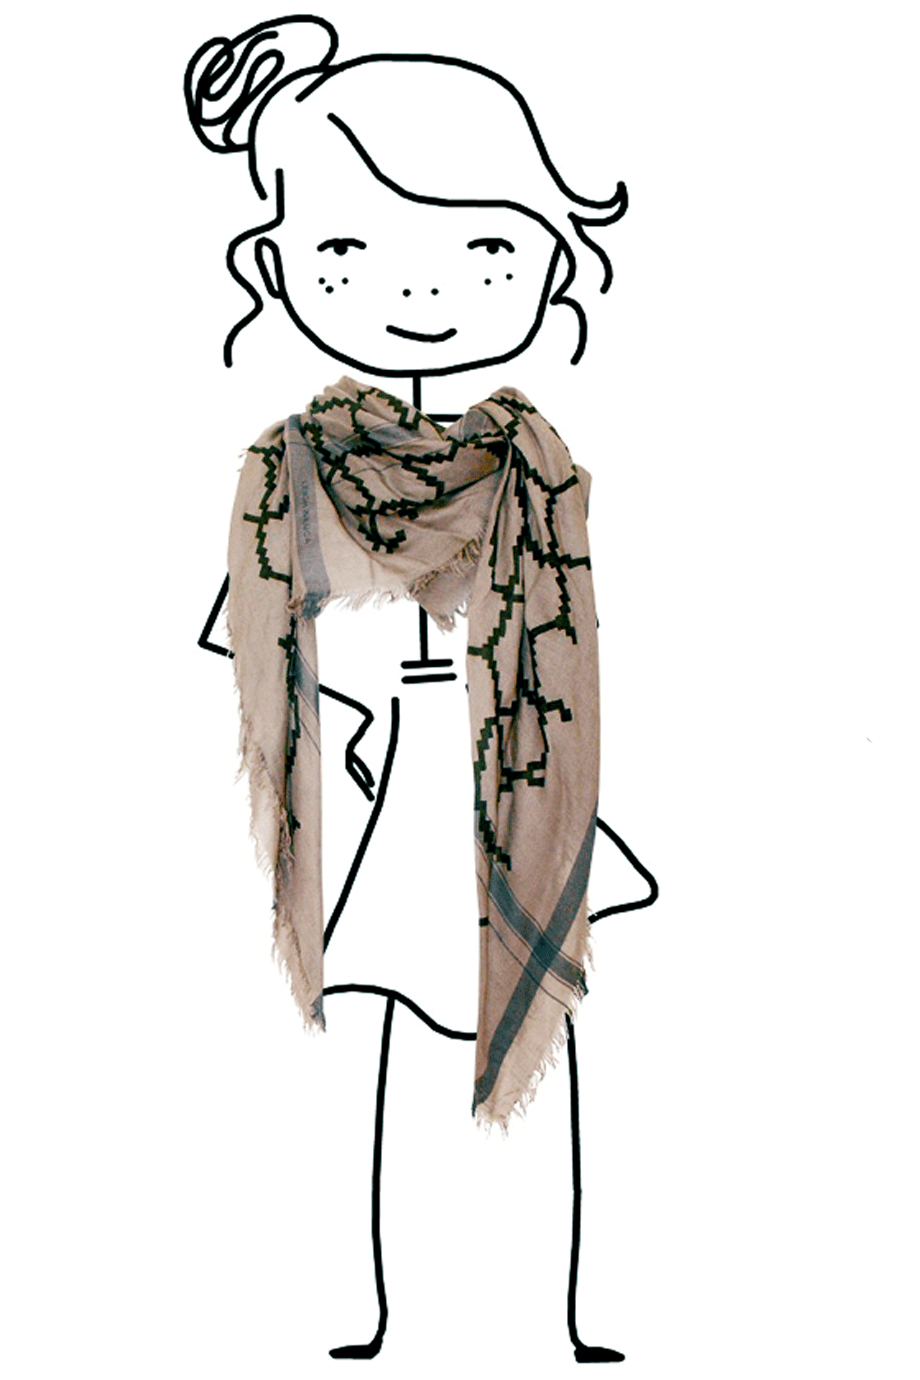 ROME Gray Brown Scarf